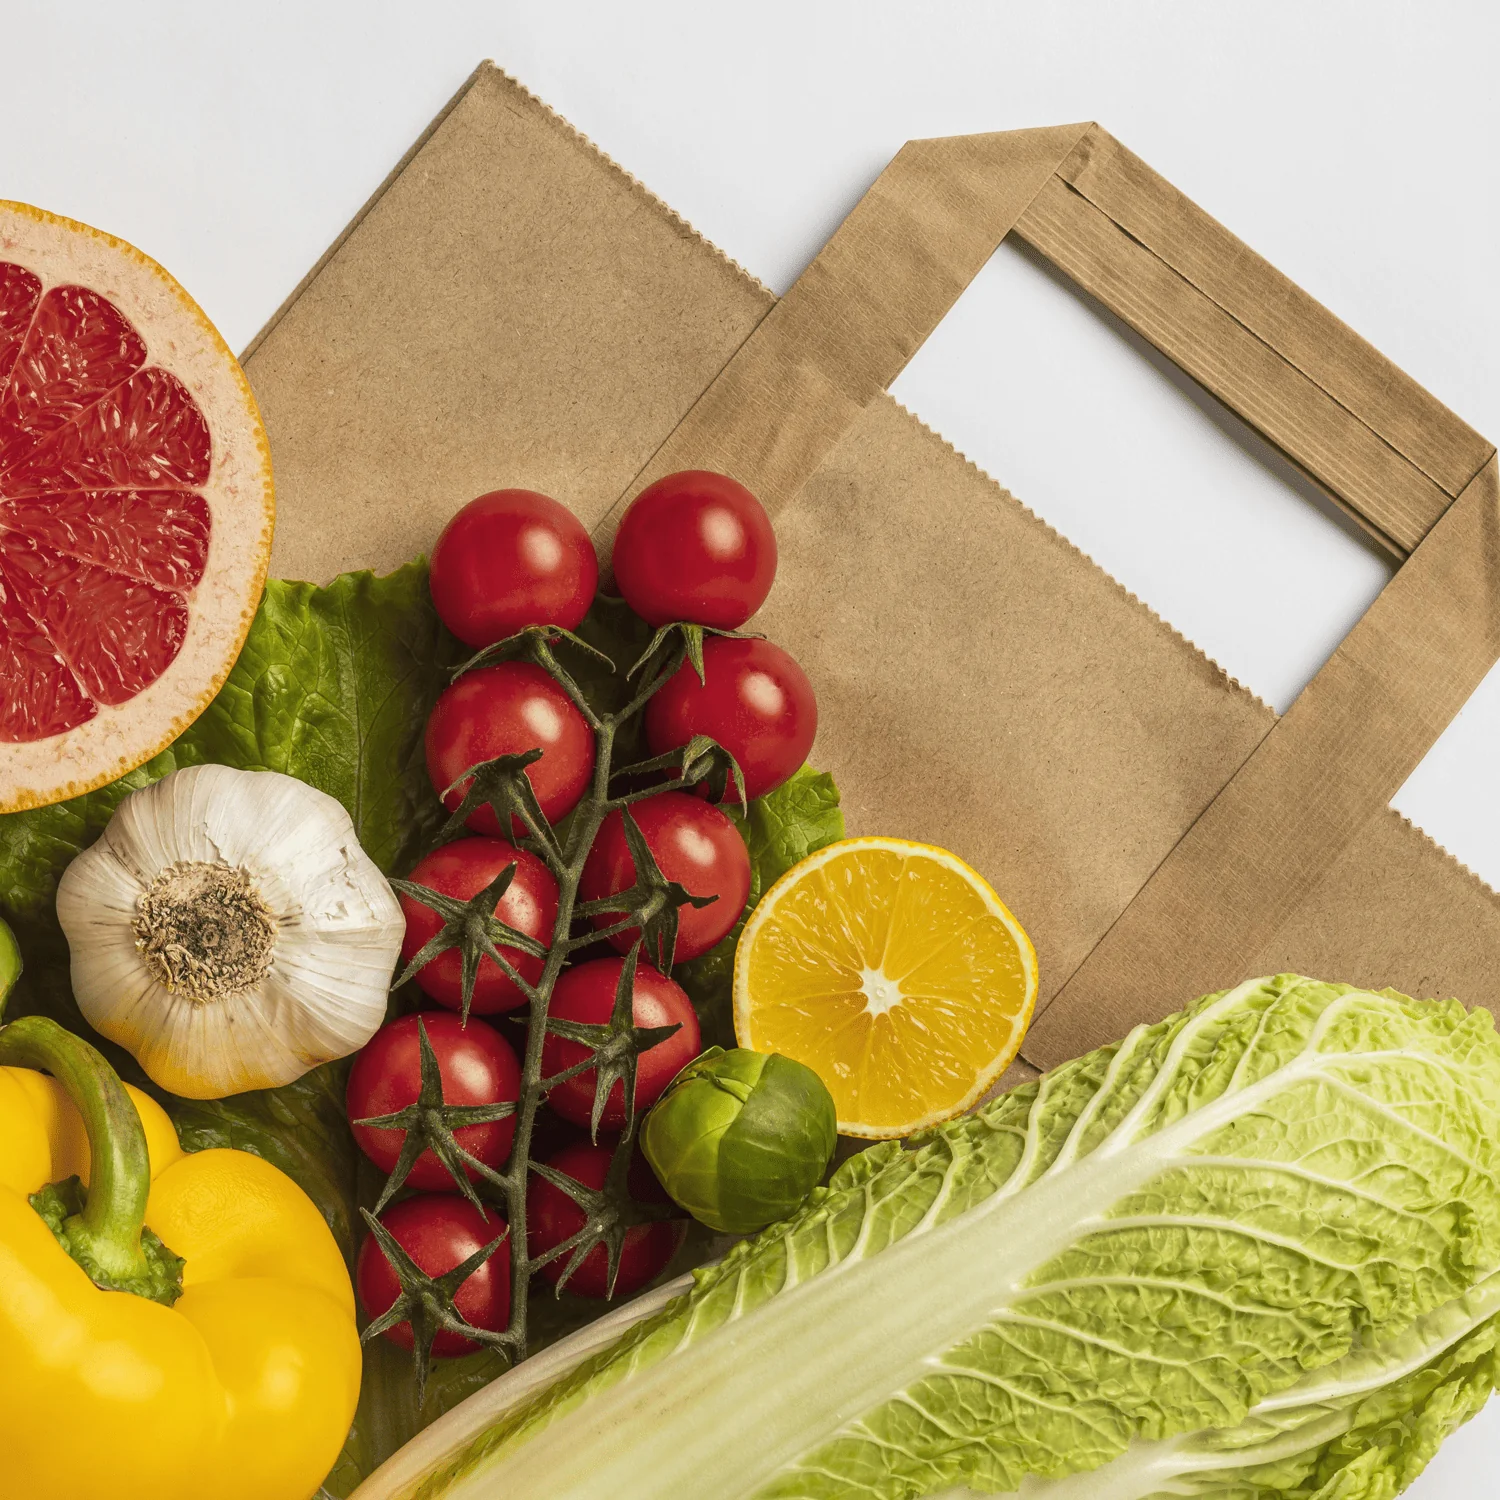 Use of paper bags in the food industry